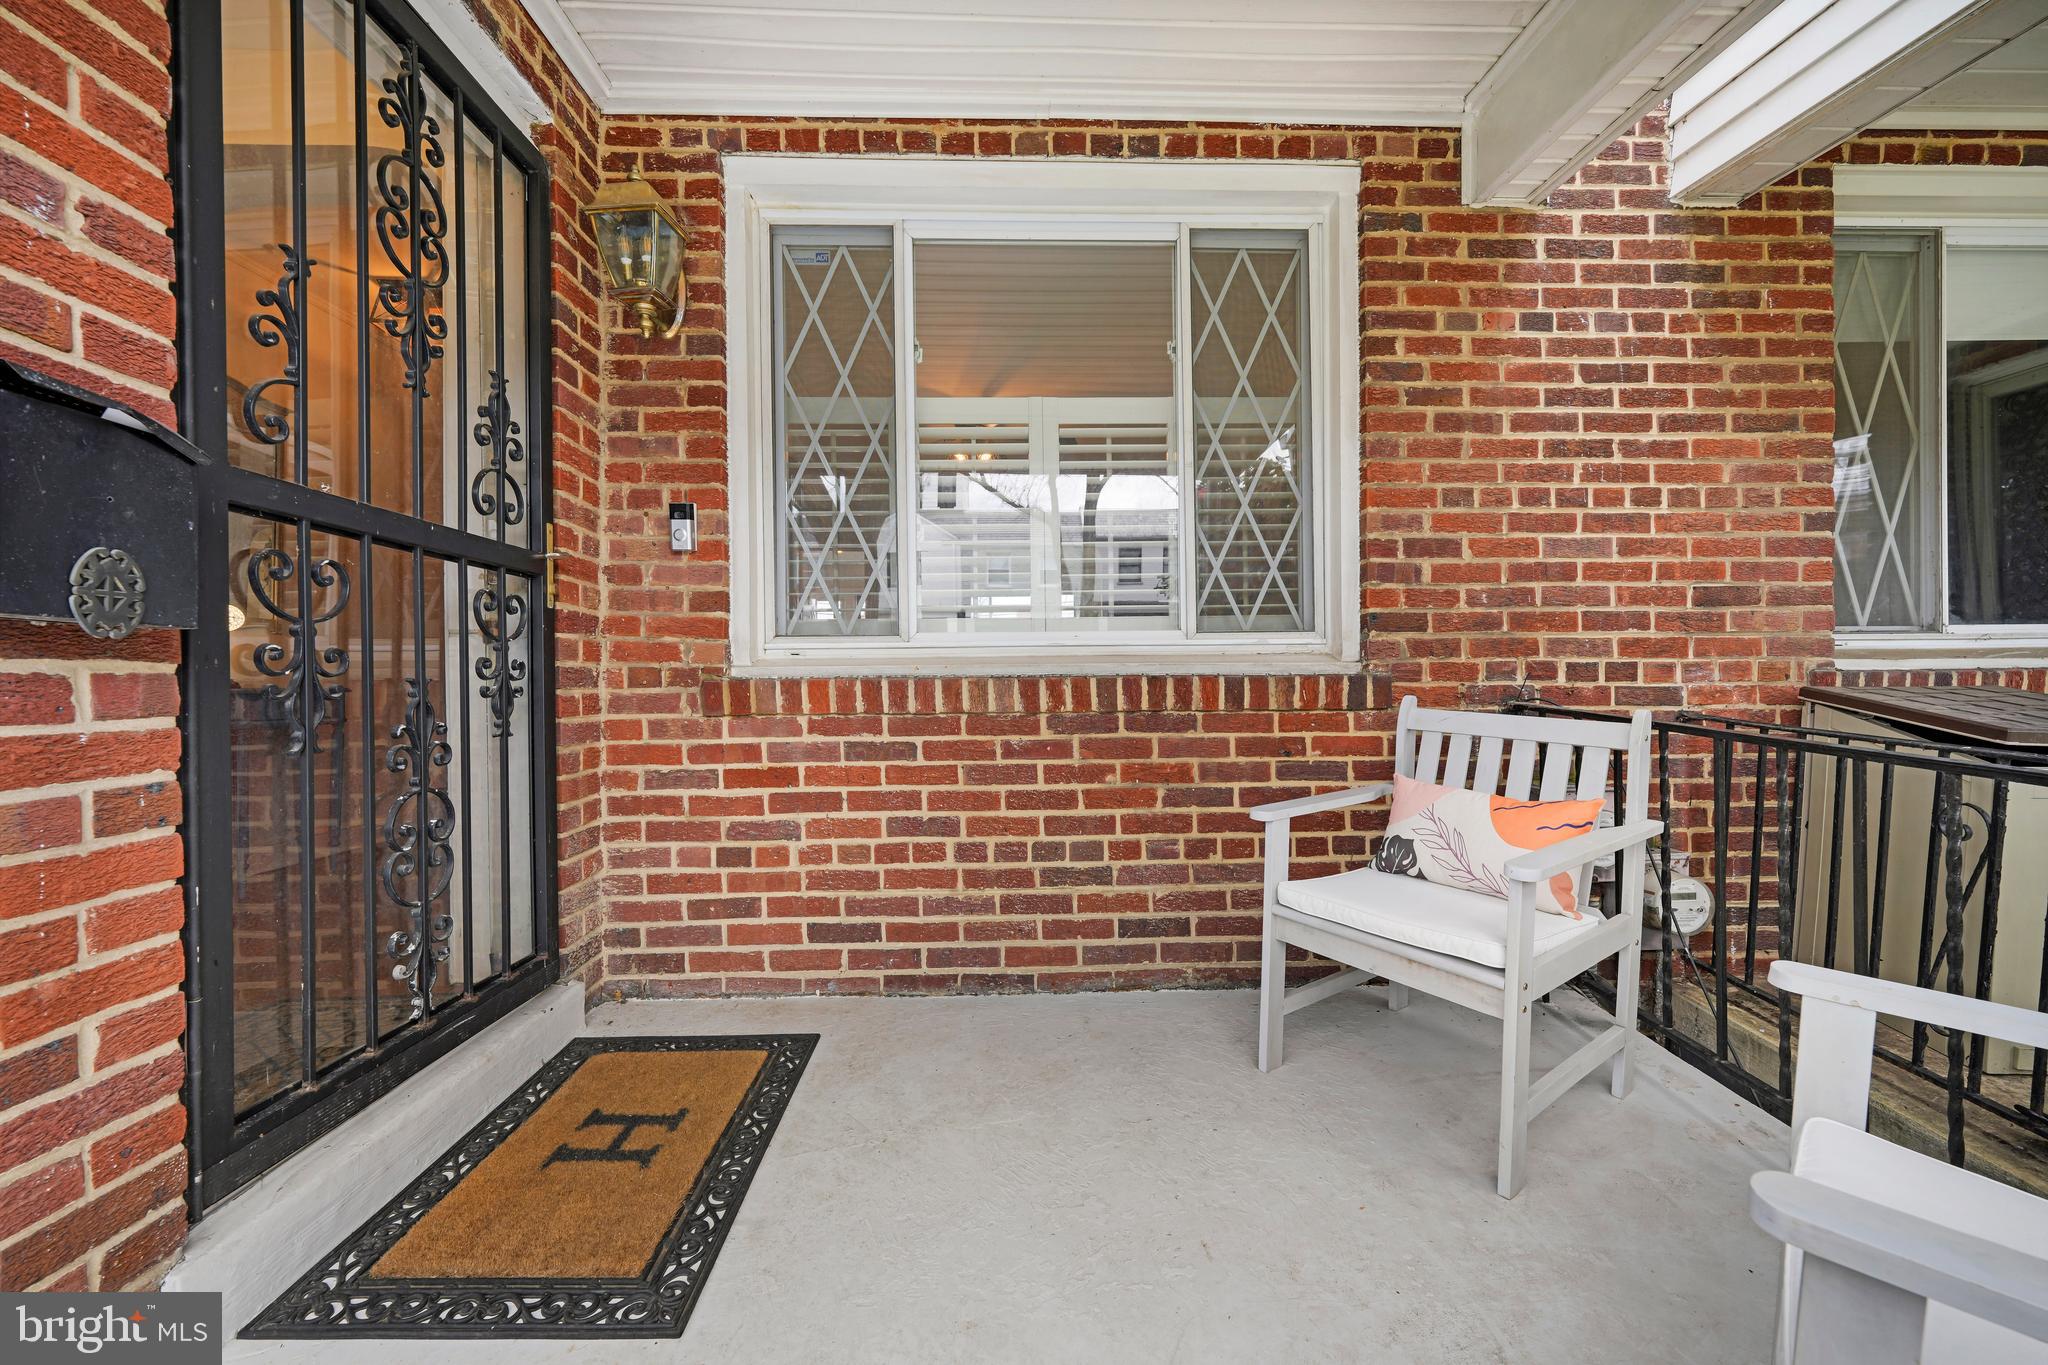 a view of front door with outdoor seating